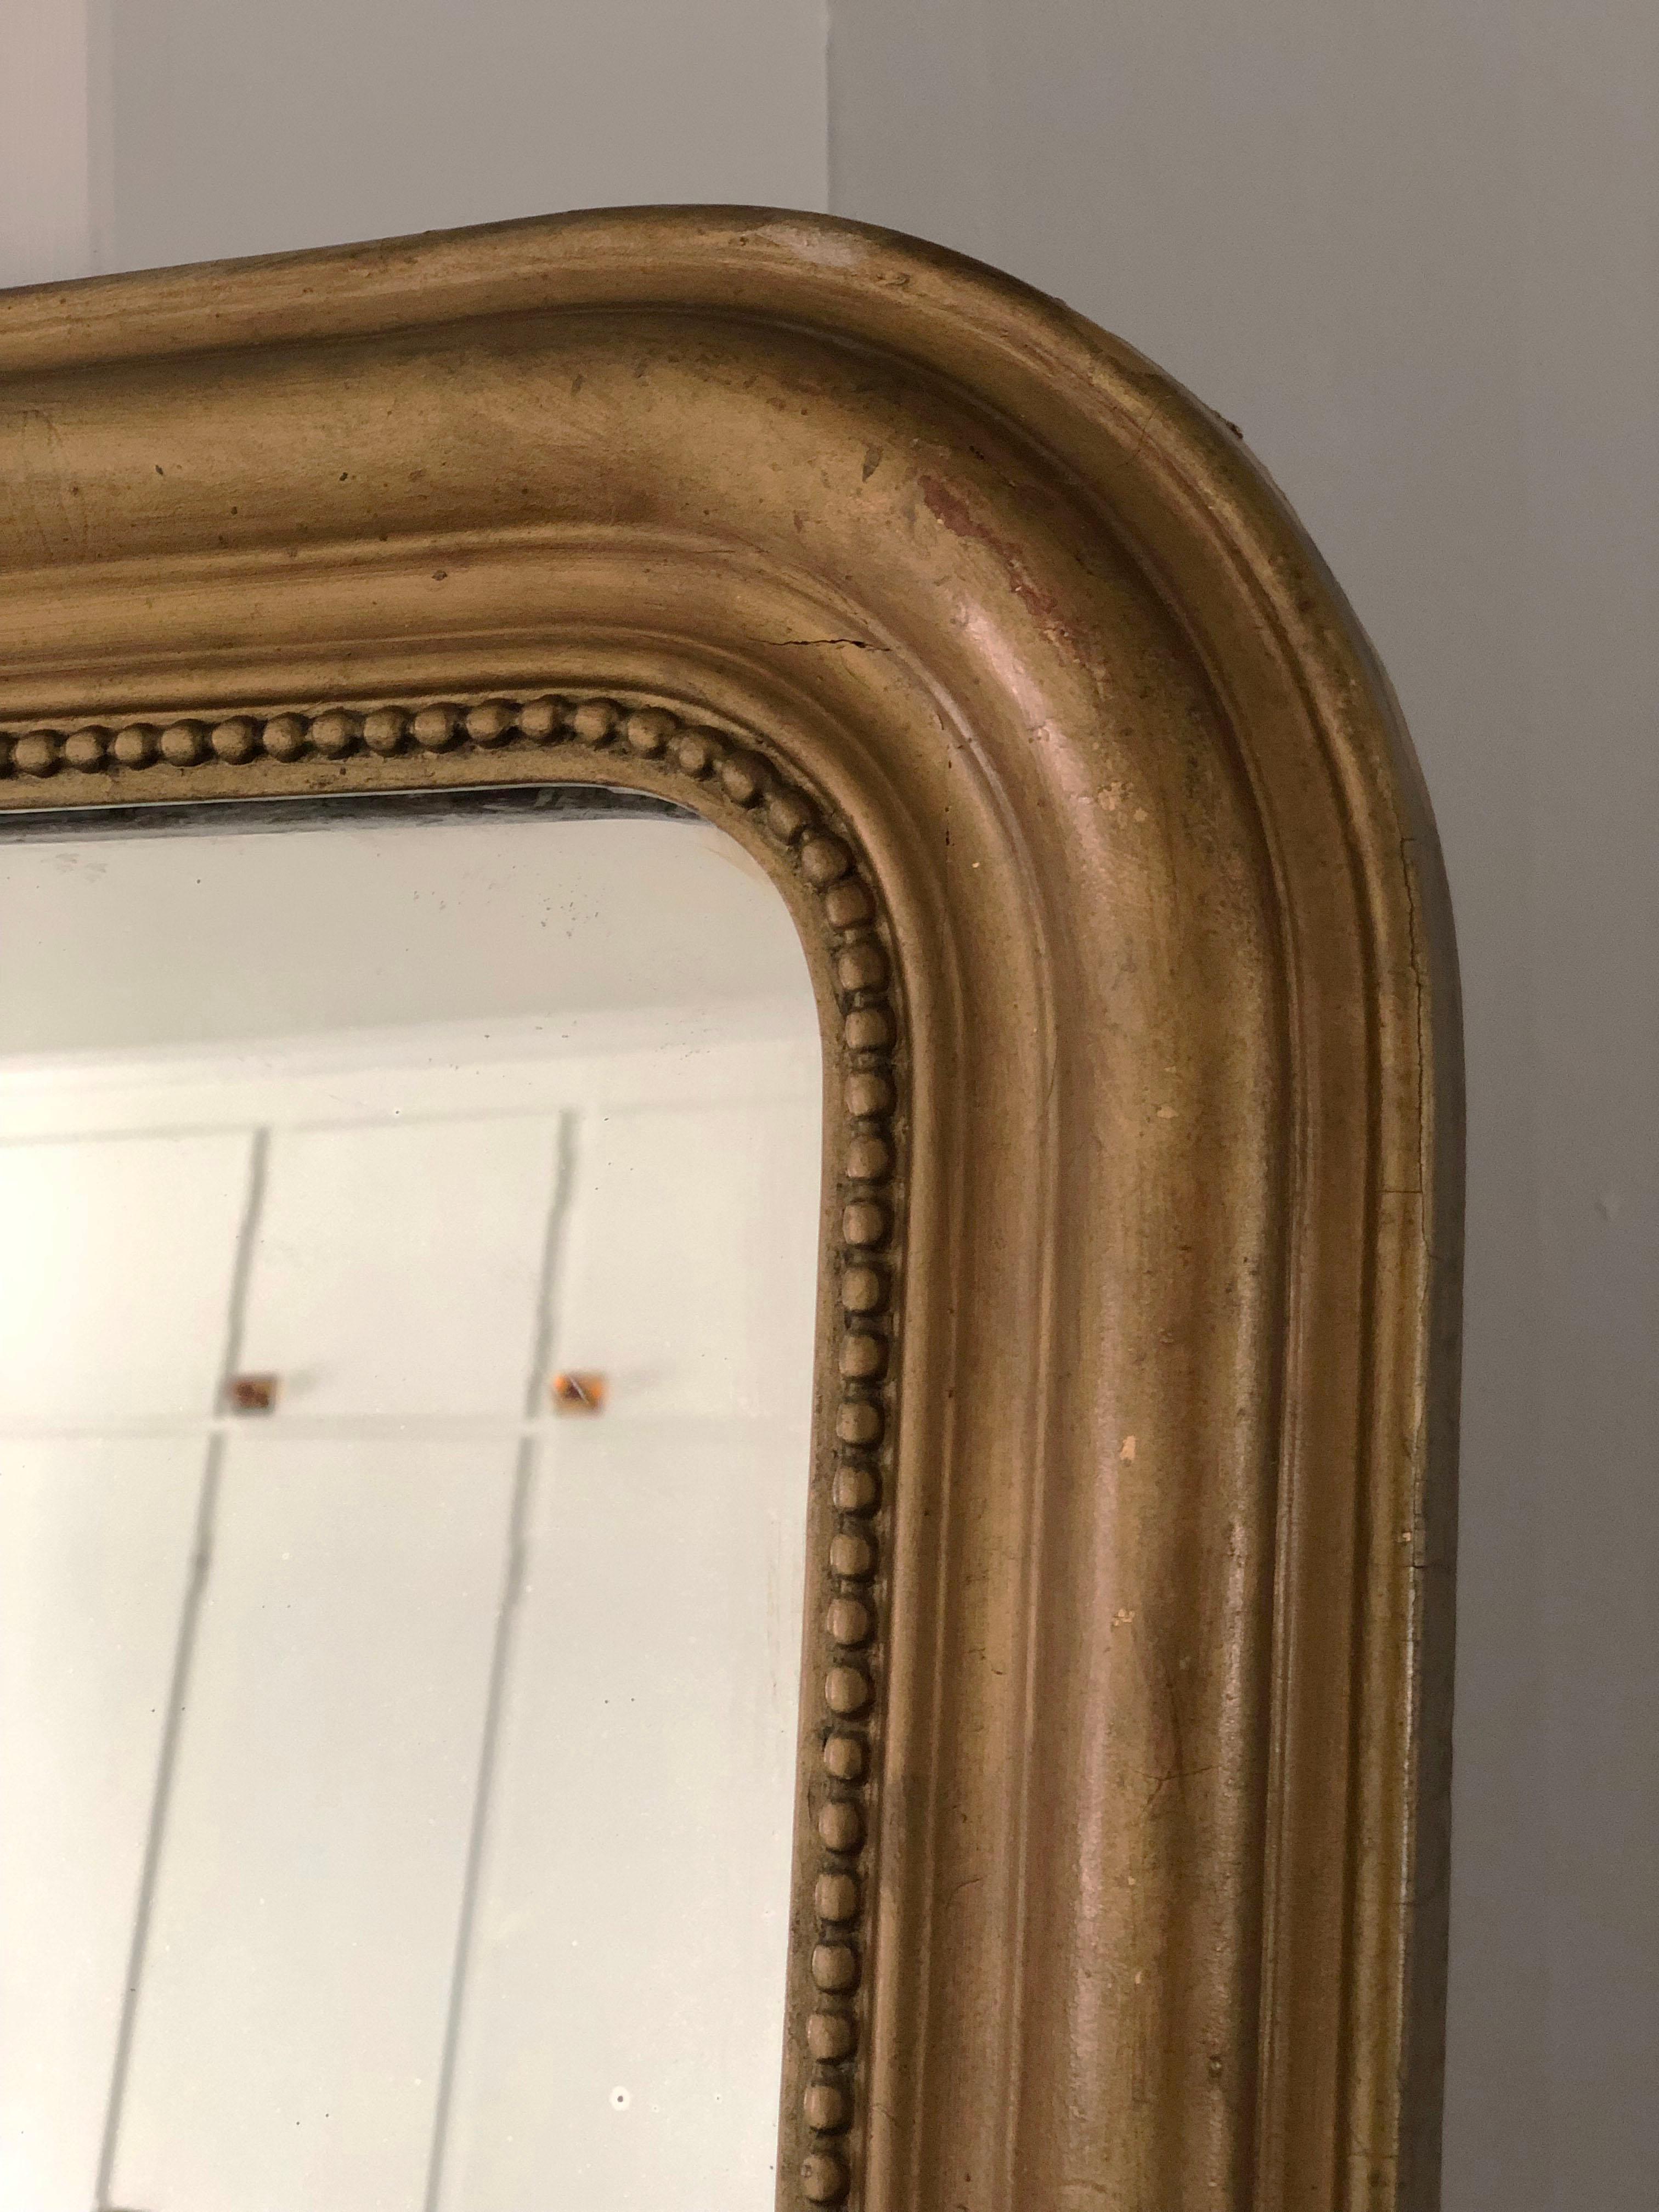 Antique 19th Century giltwood Louis Philippe mirror with beautiful worn gold leaf patina. Curved top corners and the frame is surrounded by a pearl rim. Original mercury glass and back.

Beautifully weathered mirror In good condition. France, Late